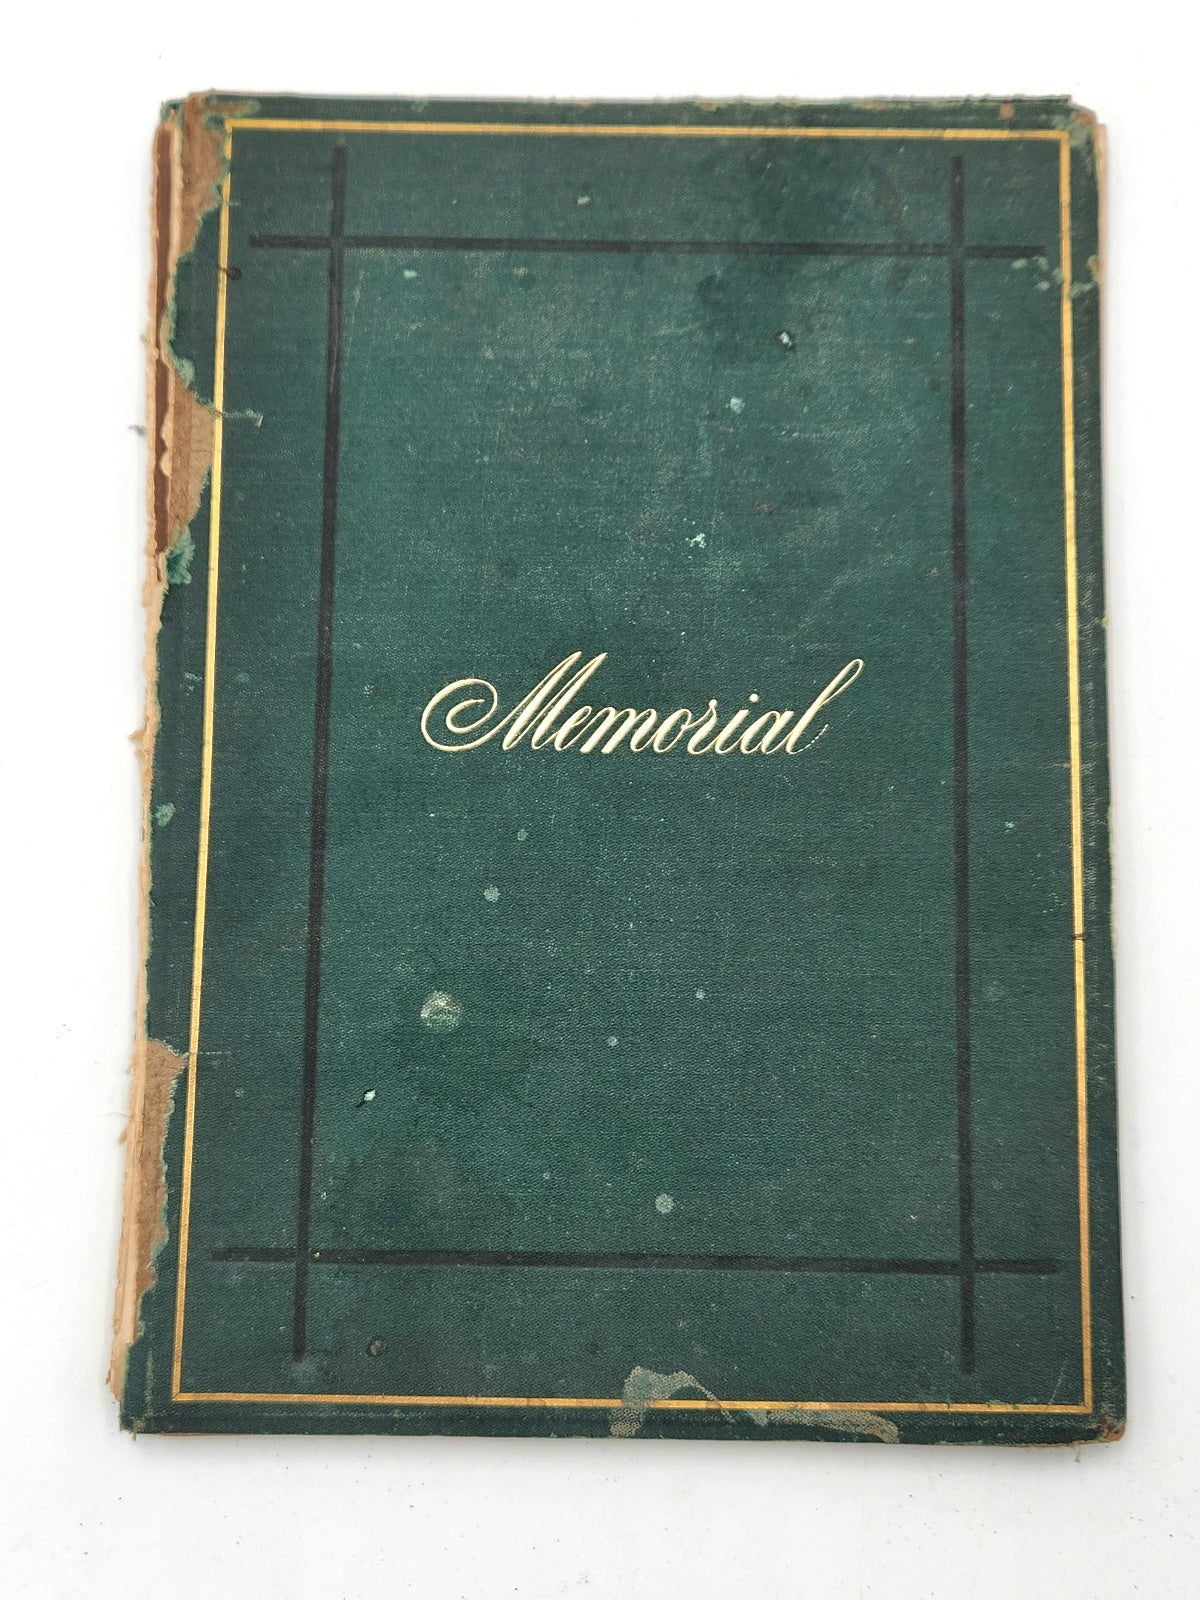 Memorial Book of Charity Barnum - Signed by P.T. Barnum to His Niece